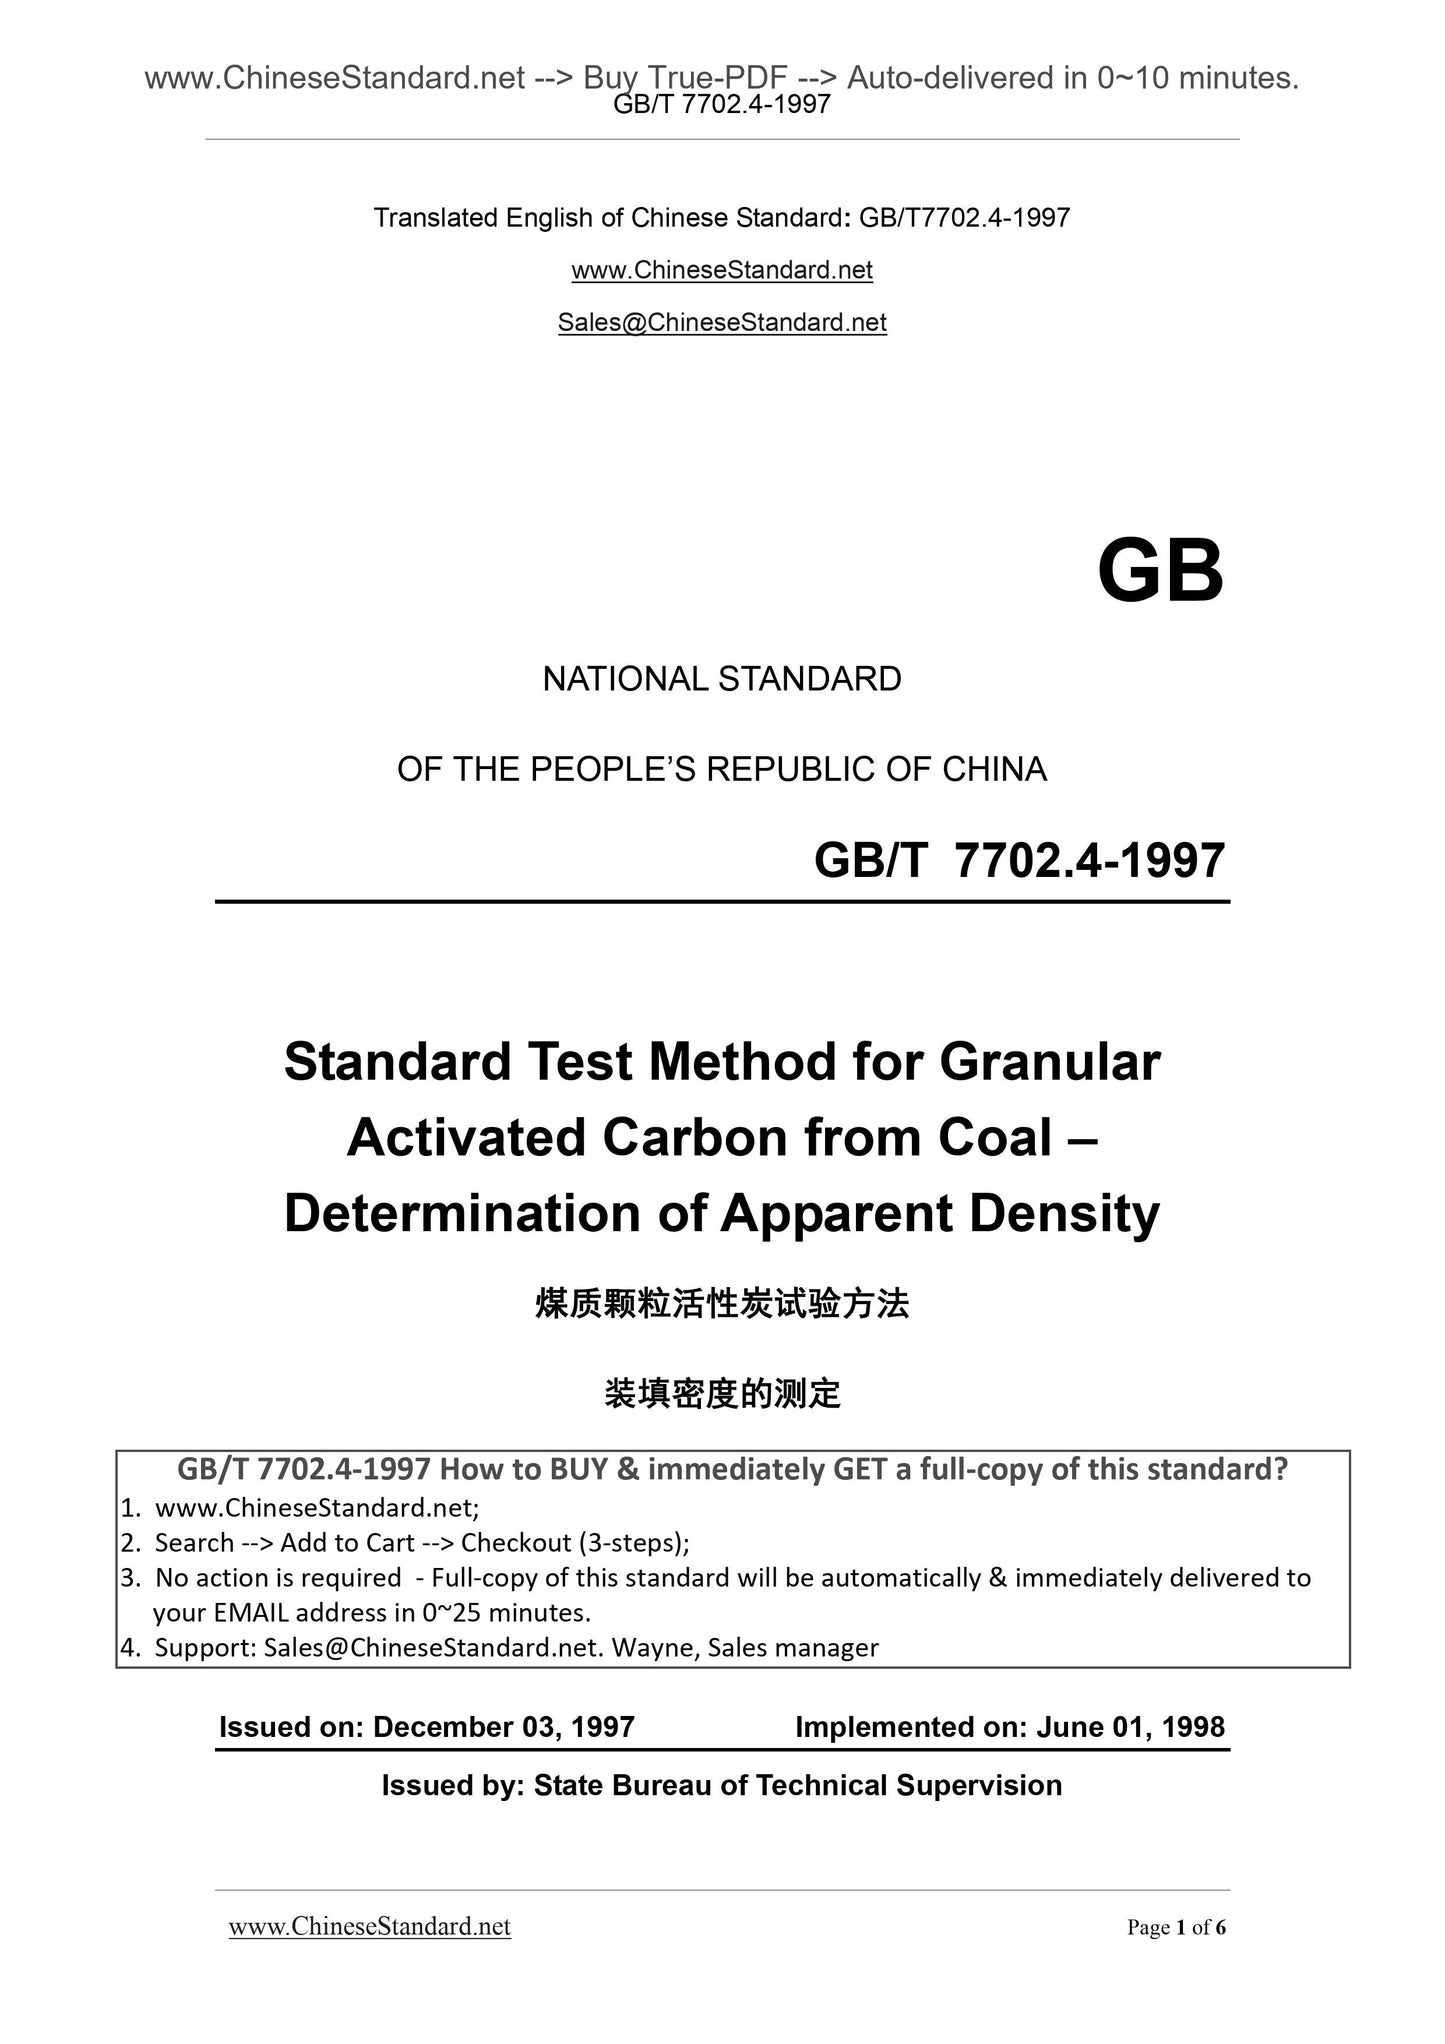 GB/T 7702.4-1997 Page 1